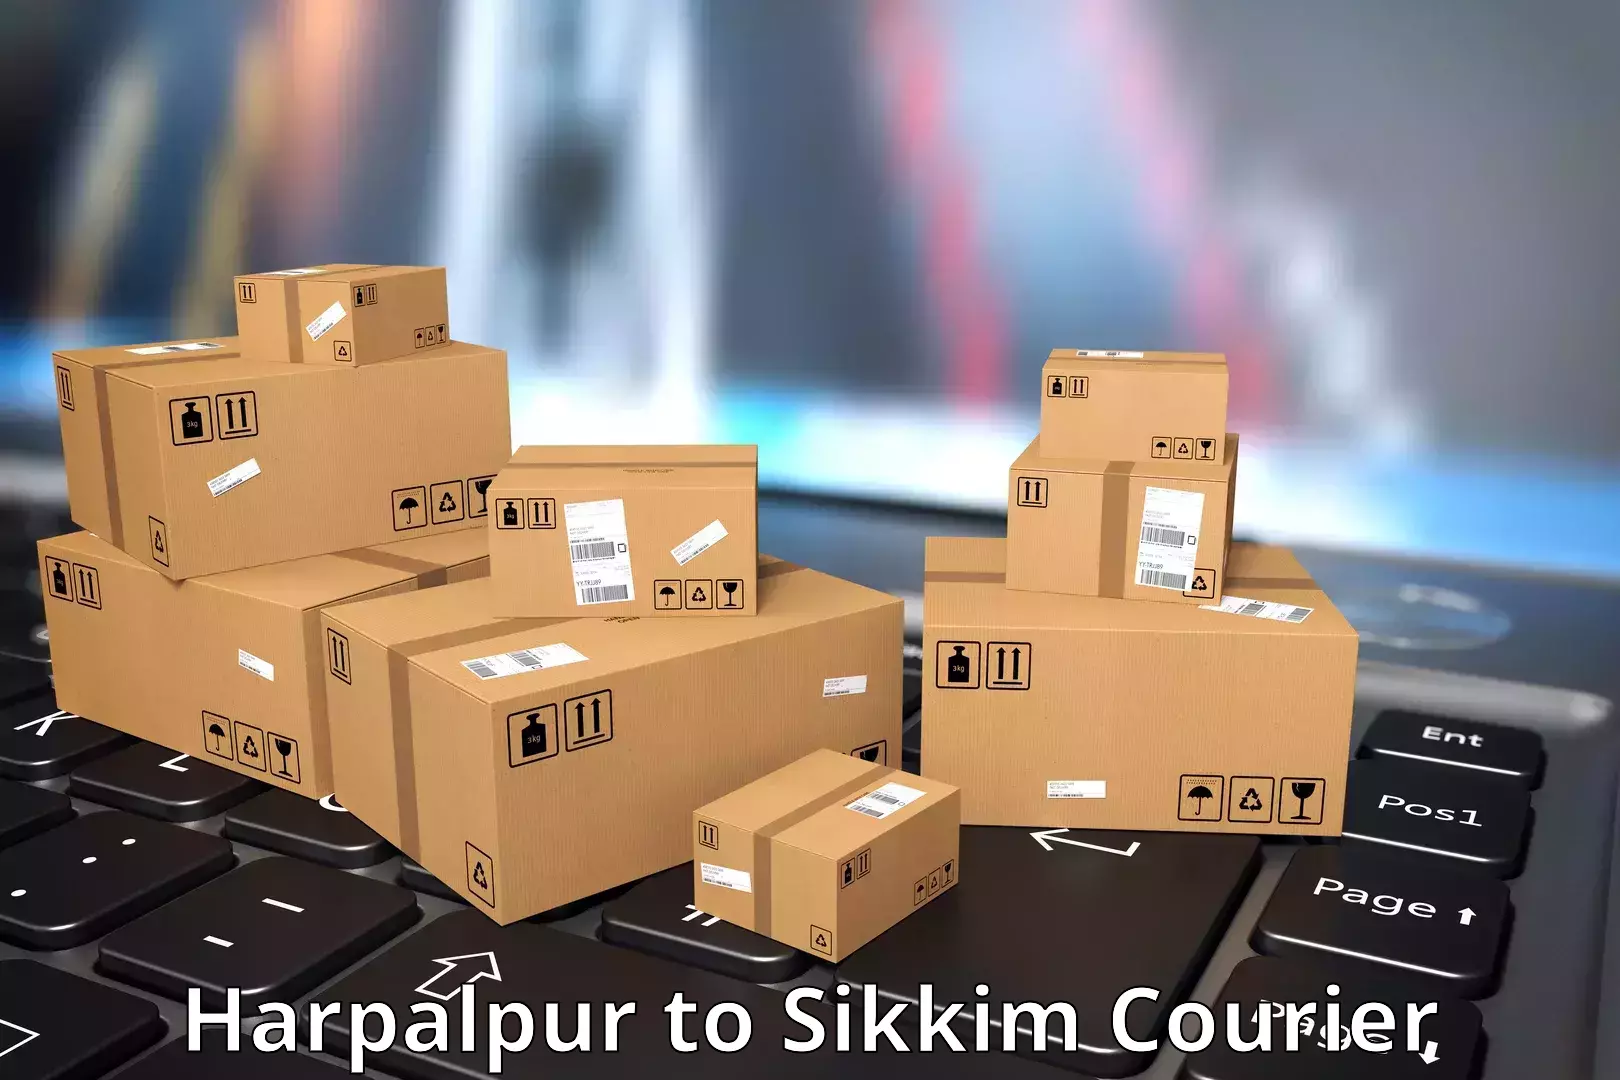 Business shipping needs Harpalpur to Pelling